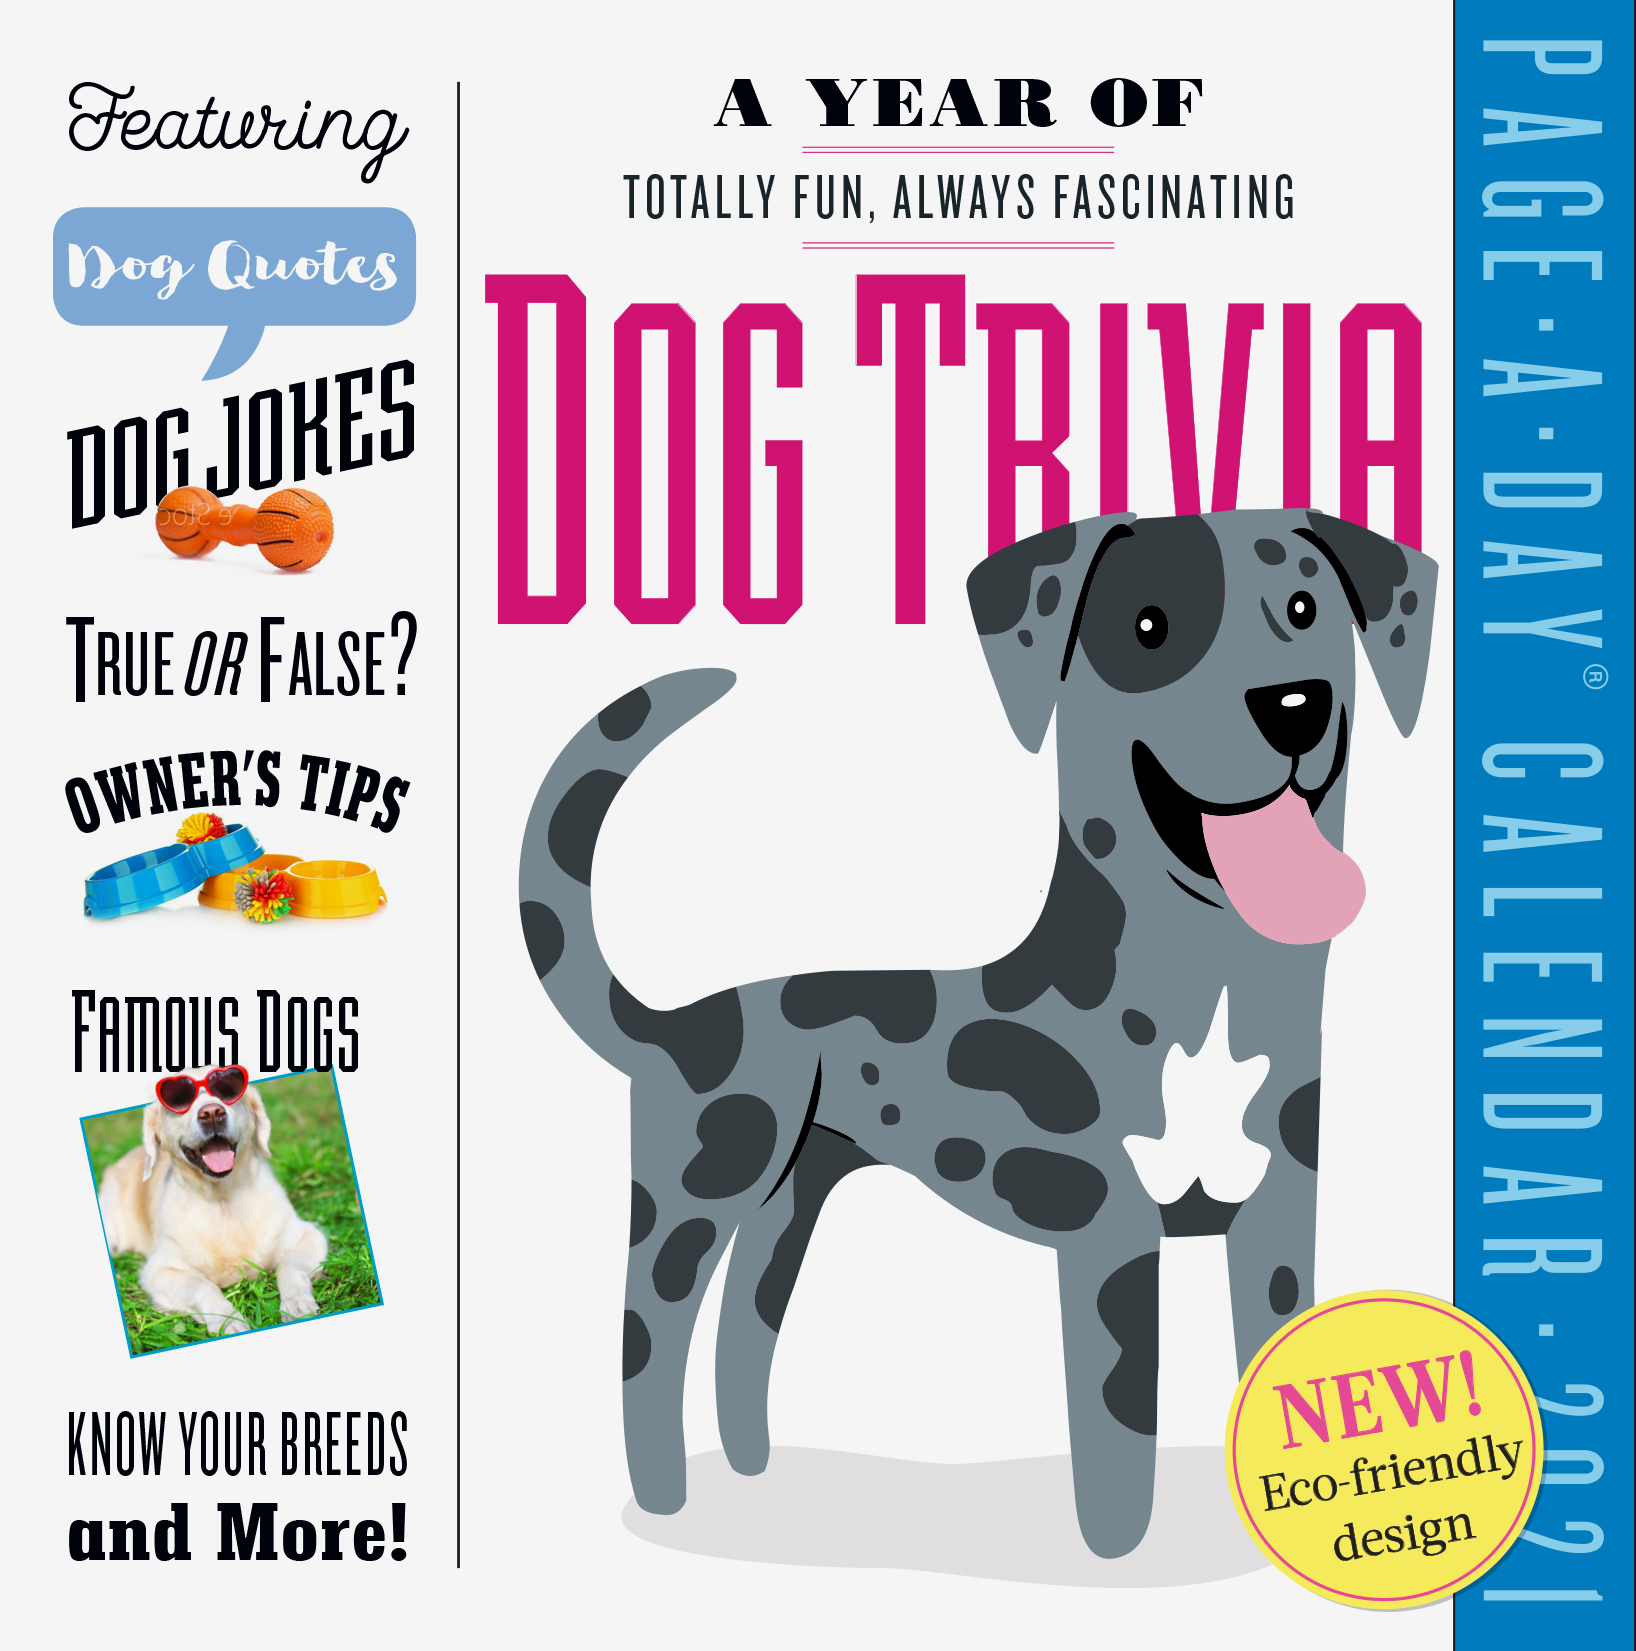 Calendar 2021 - Year of Dog Trivia Page-A-Day | Workman Publishing